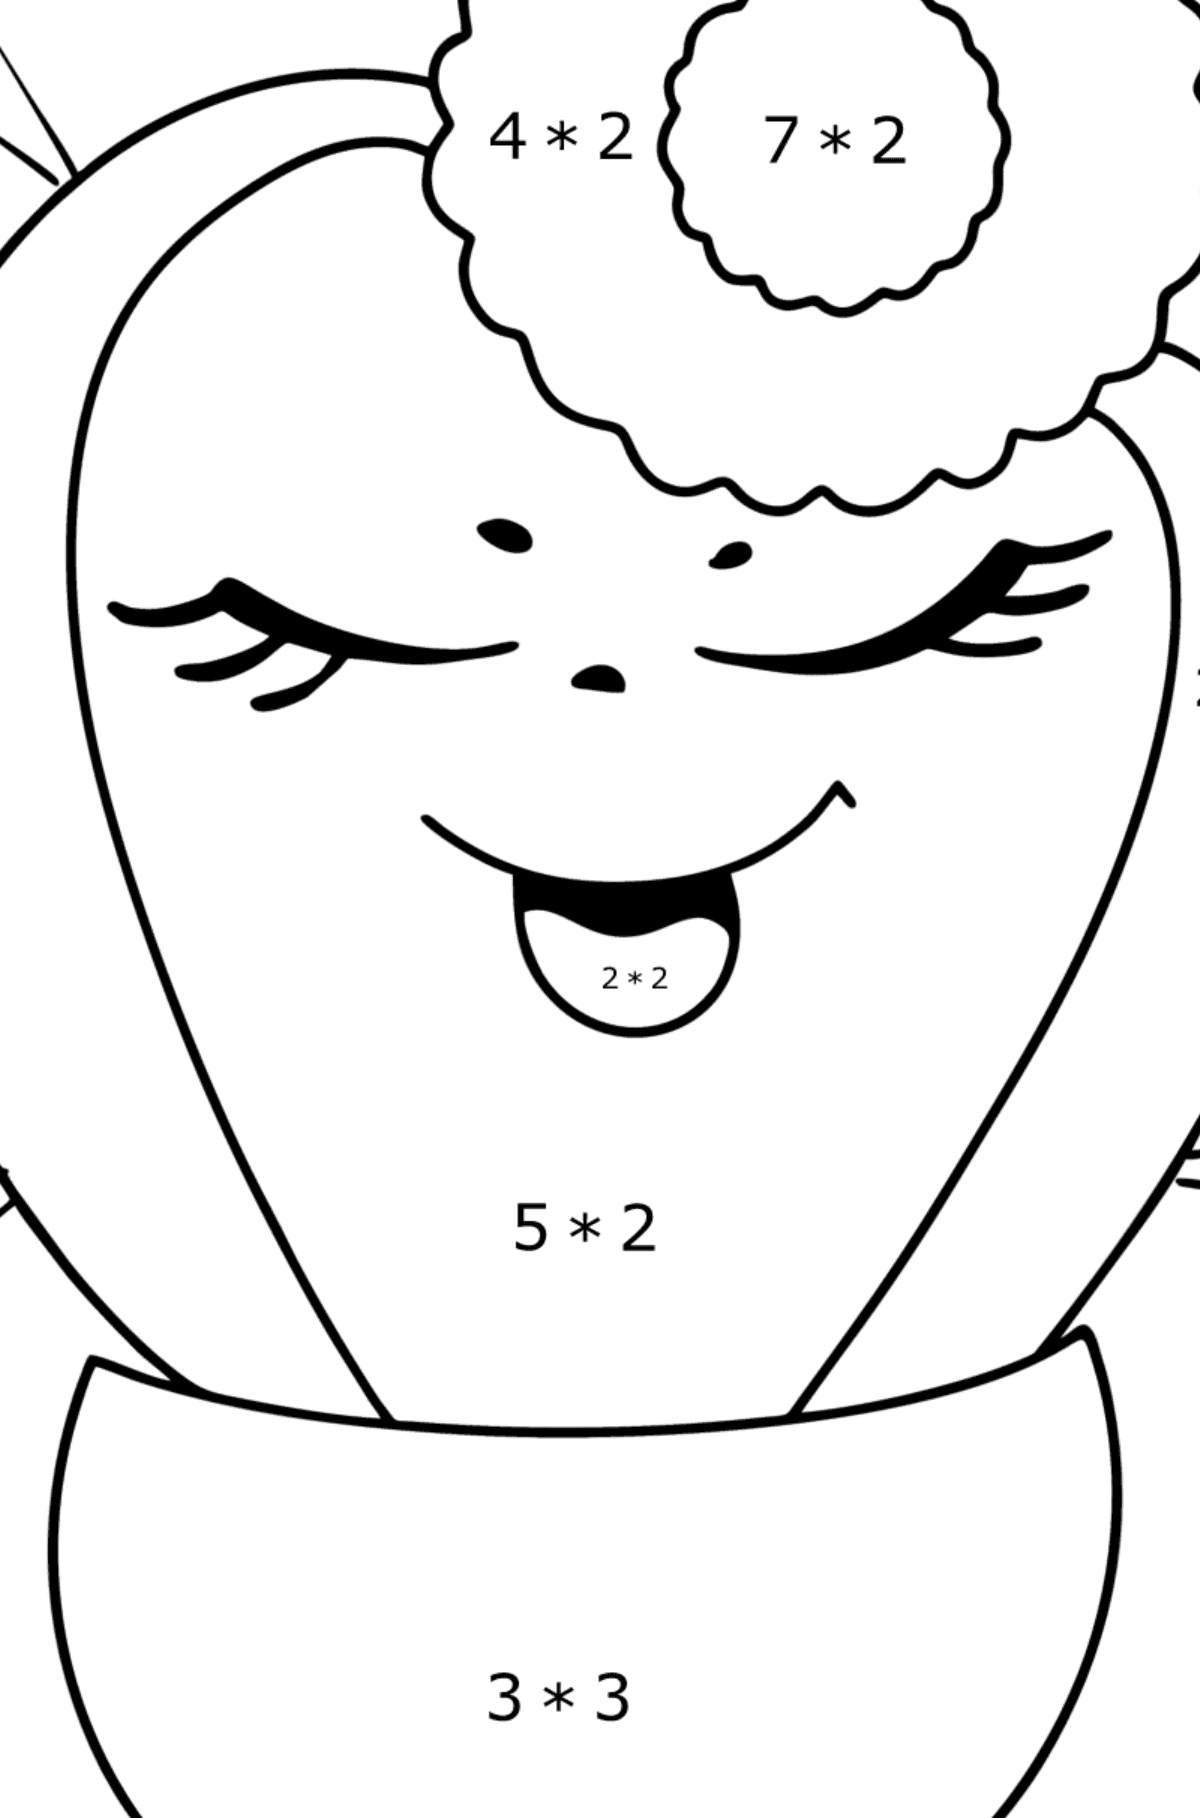 Cactus girl coloring page - Math Coloring - Multiplication for Kids